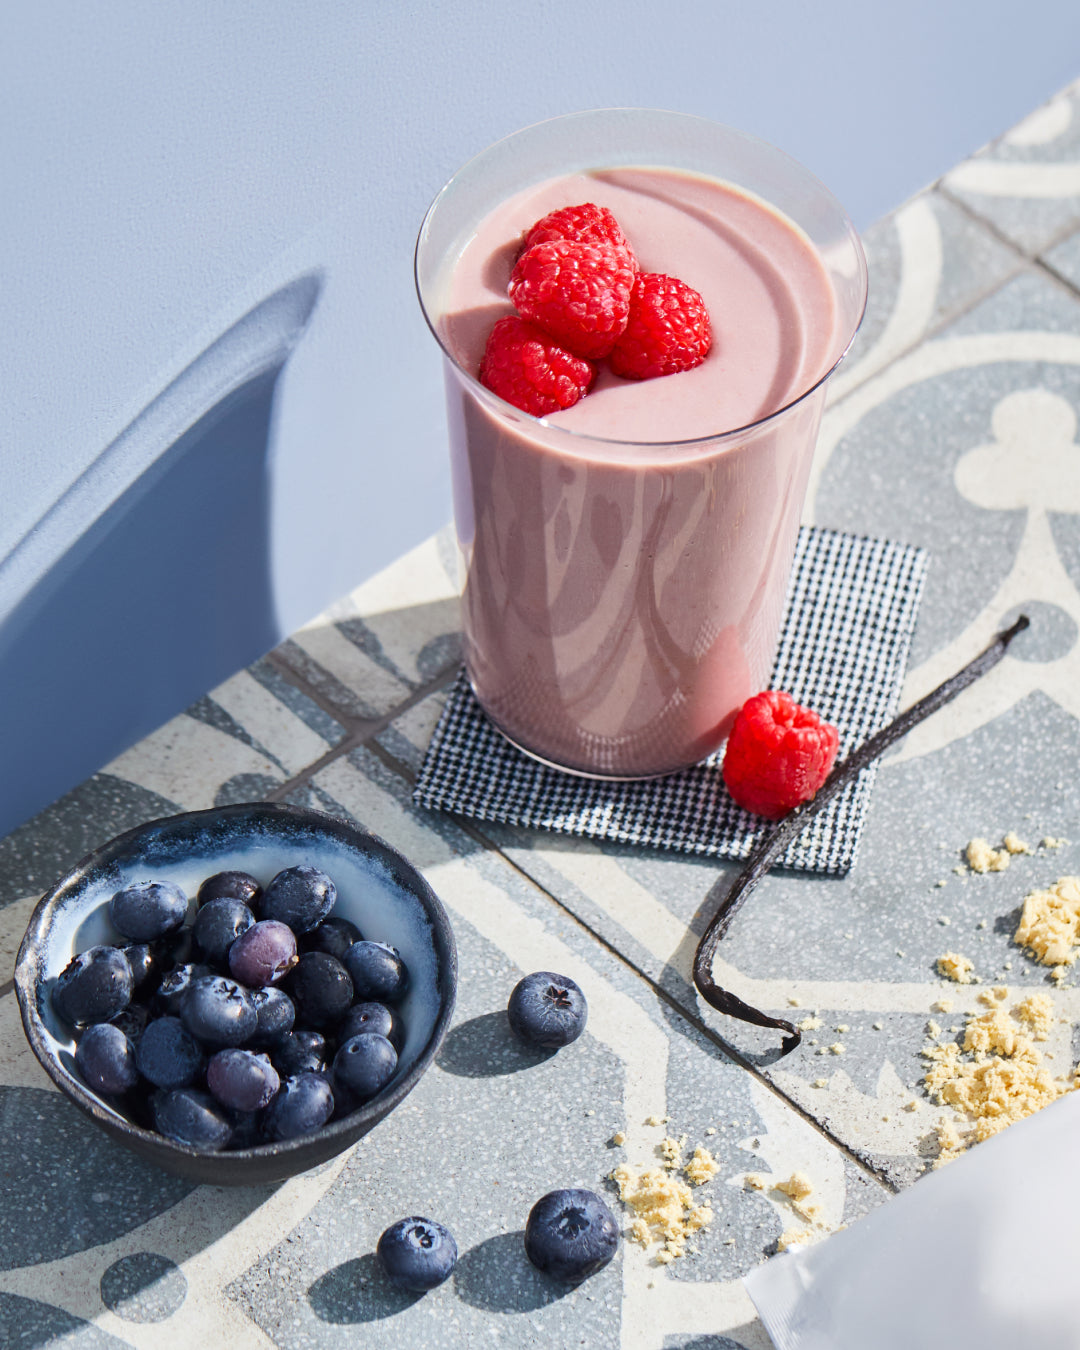 Berry protein shake topped with raspberries beside a bowl of blueberries and vanilla beans on a patterned tile surface